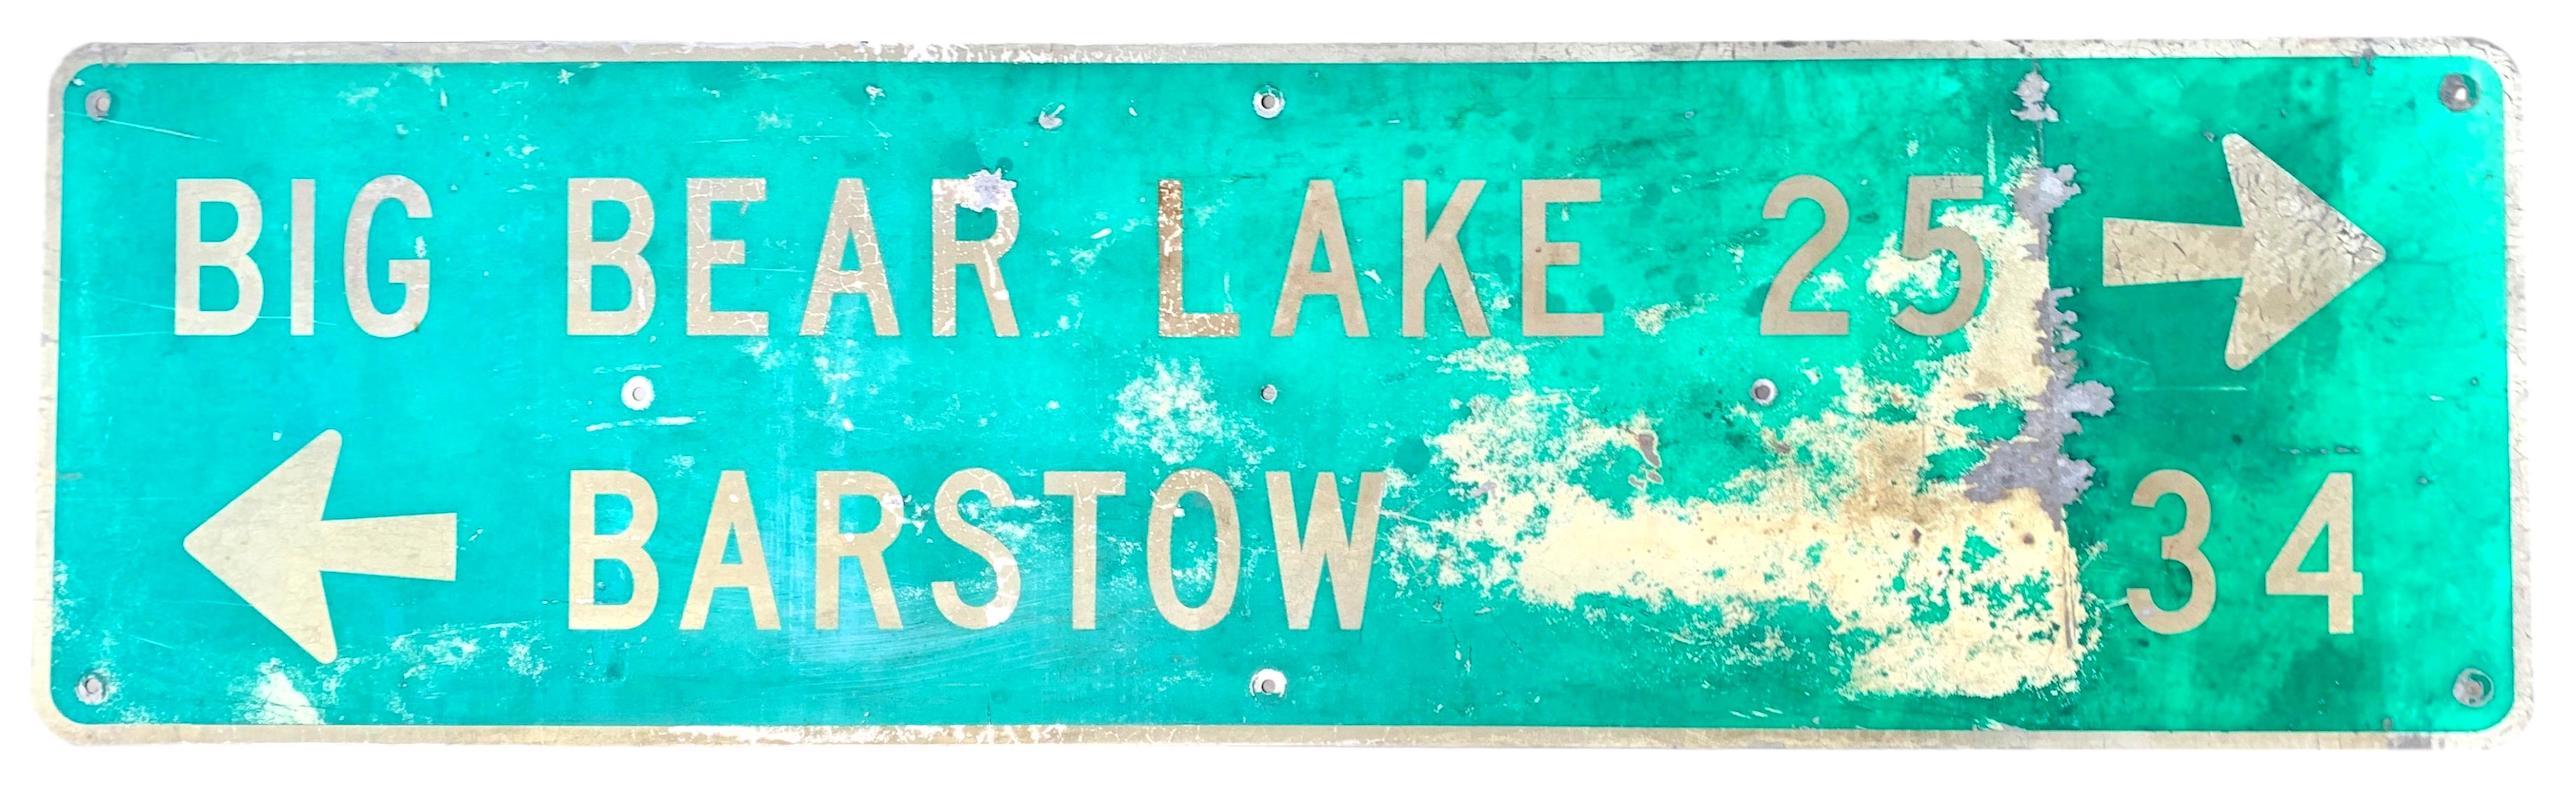 Very cool vintage California freeway sign showing the way to Big Bear Lake. Iconic location in California, cool piece of history. Great coloring and worn condition. Fantastic piece of California ephemera. Over 4 feet wide.